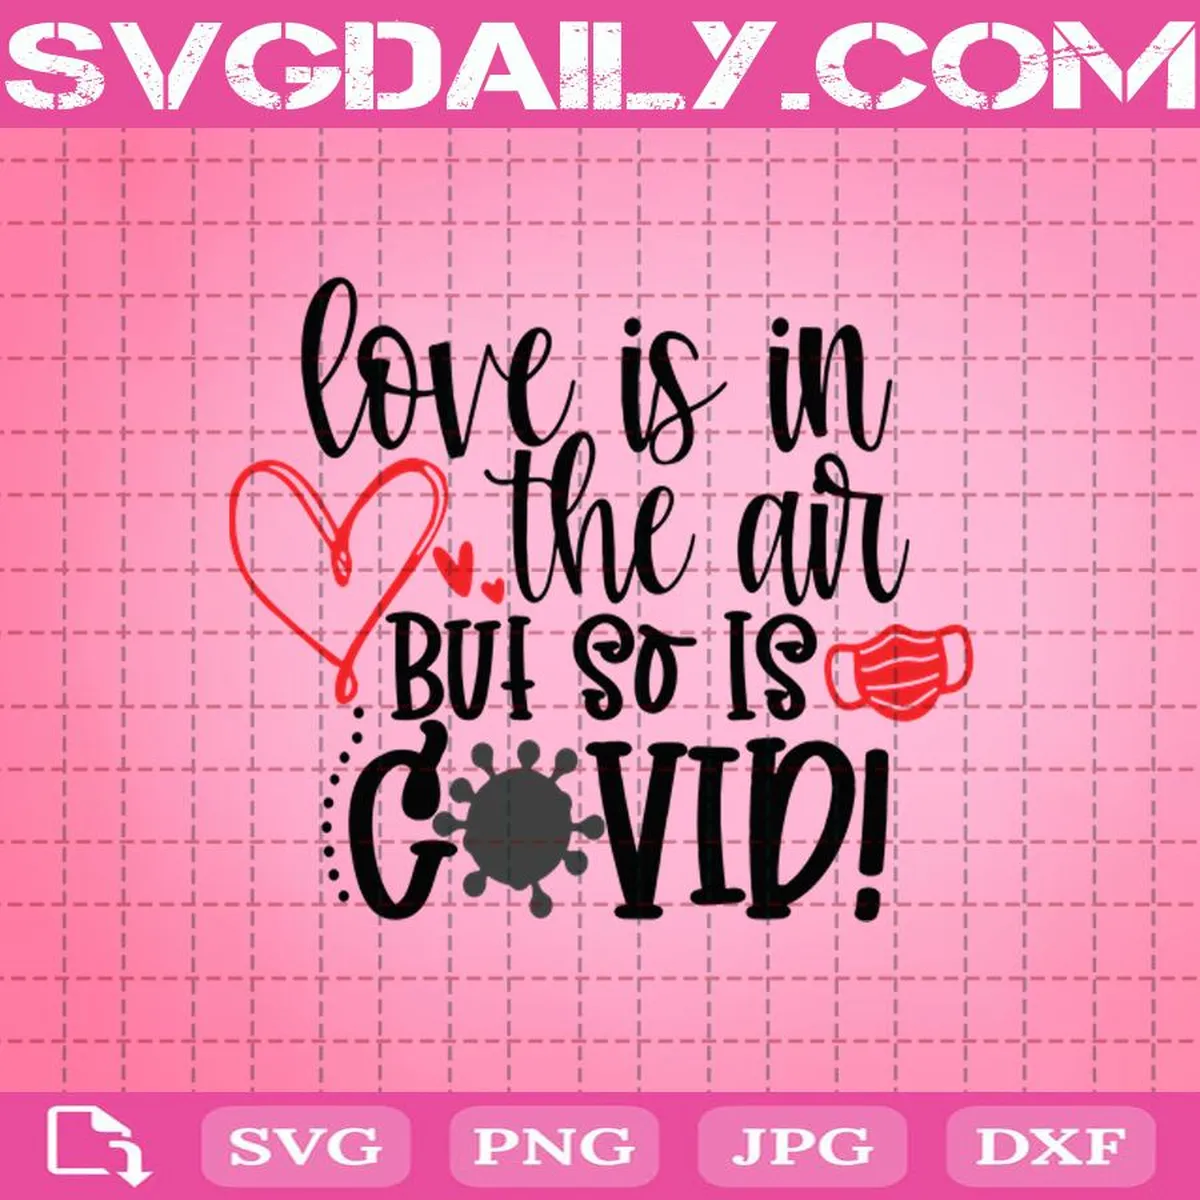 Love Is In the Air But So Is Covid Svg, Frontline Warrior Svg, Healthcare Valentines Day Svg, Quarantine Valentines Day Svg, Valentine Svg